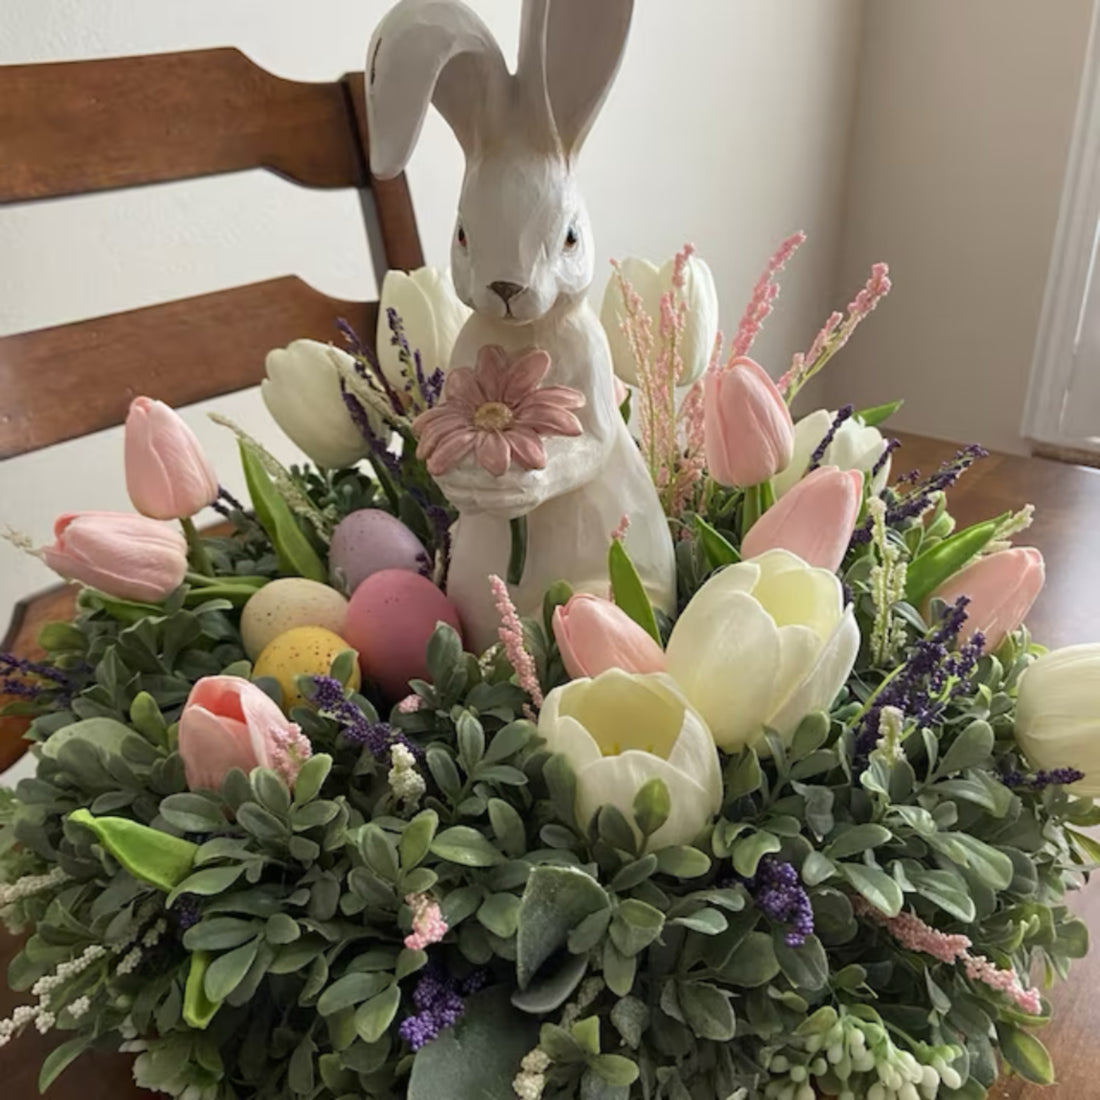 Celebrate Easter with Artificial Flowers: A Guide to Decorating Your Home